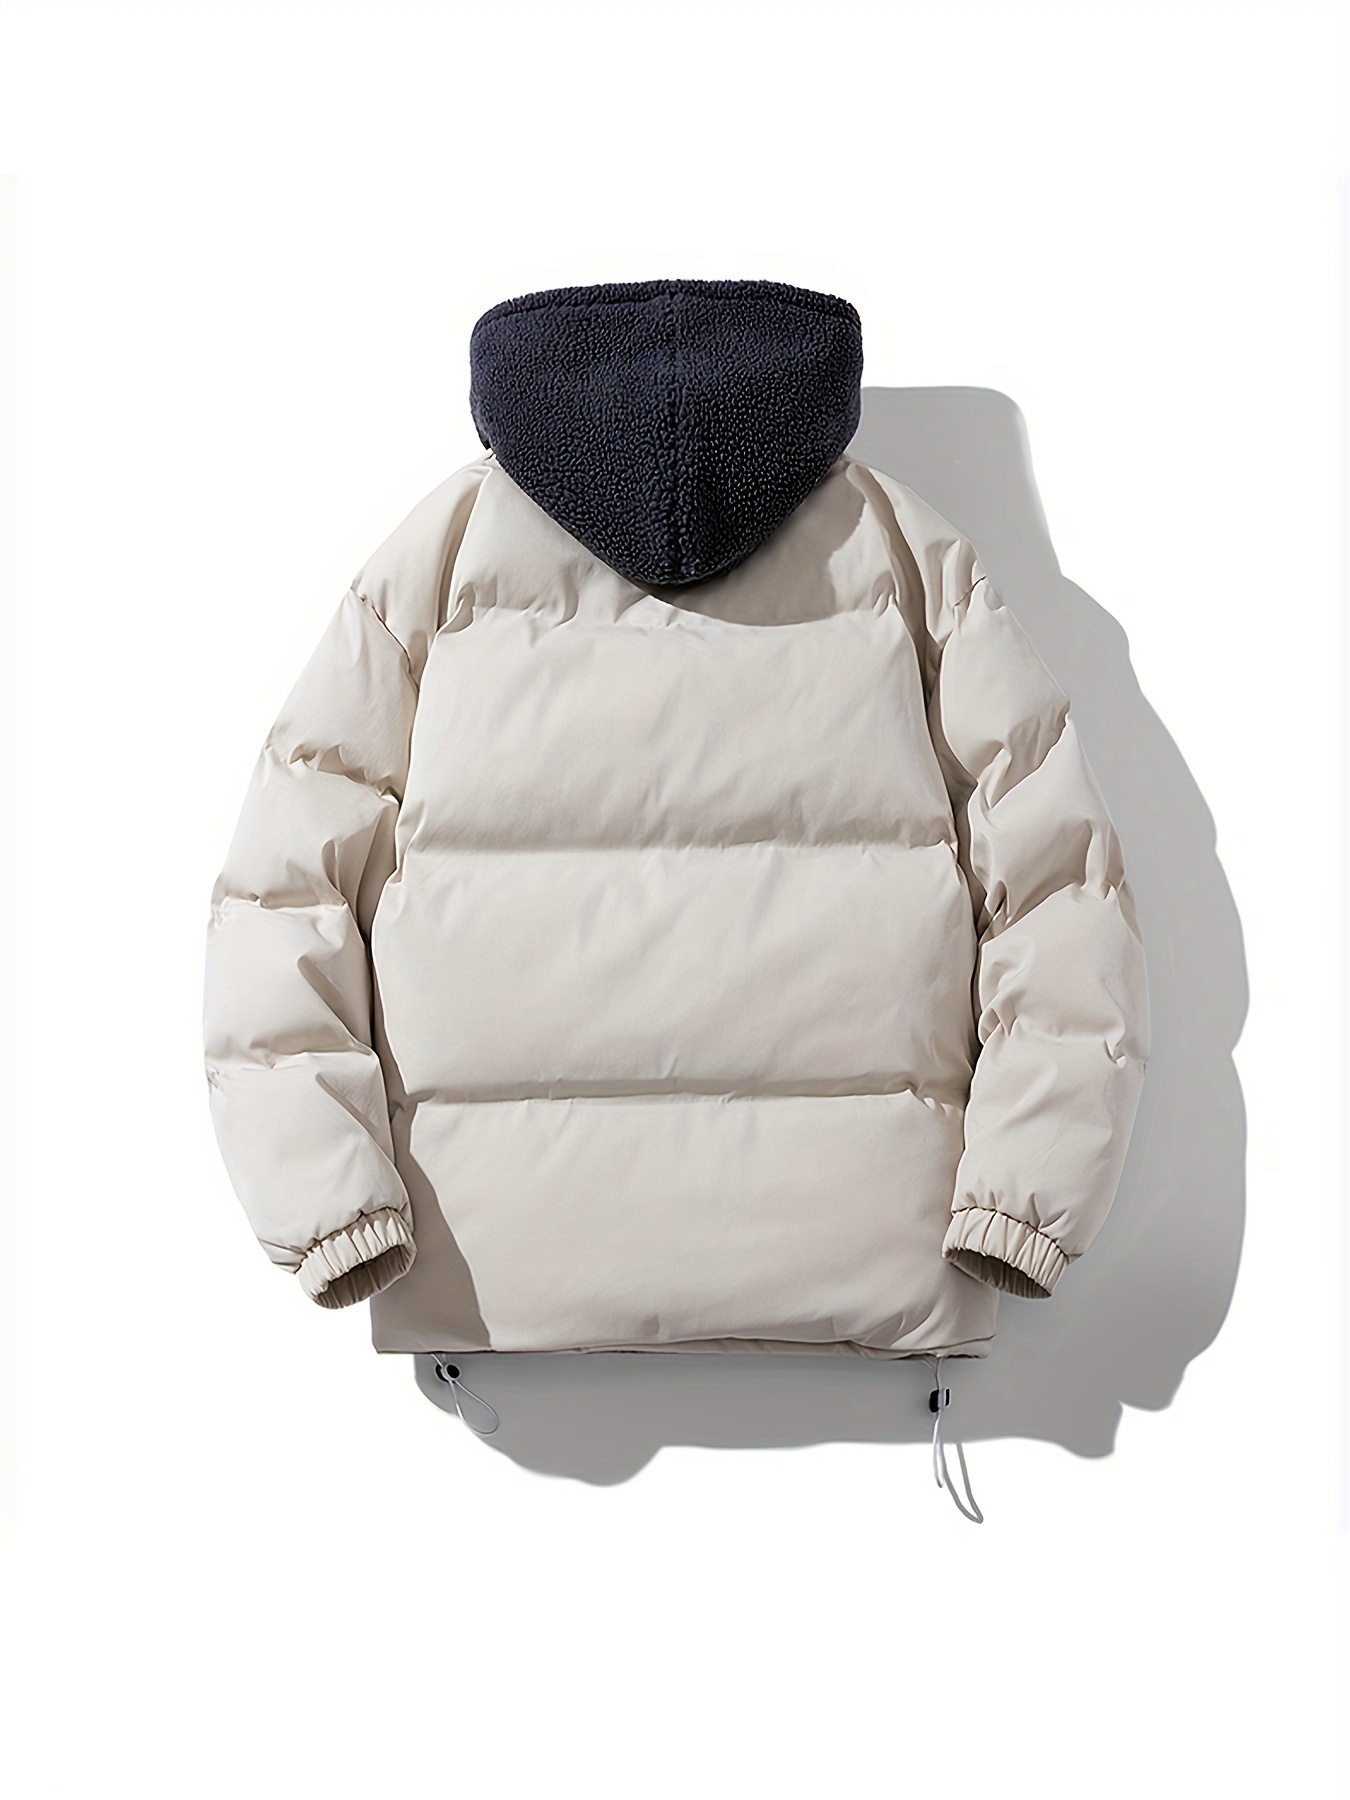 Men's Plus Size Zipper Hooded Puffer Coat, Men's Clothing For Winter, For  Big And Tall Guys, Free Shipping For New Users